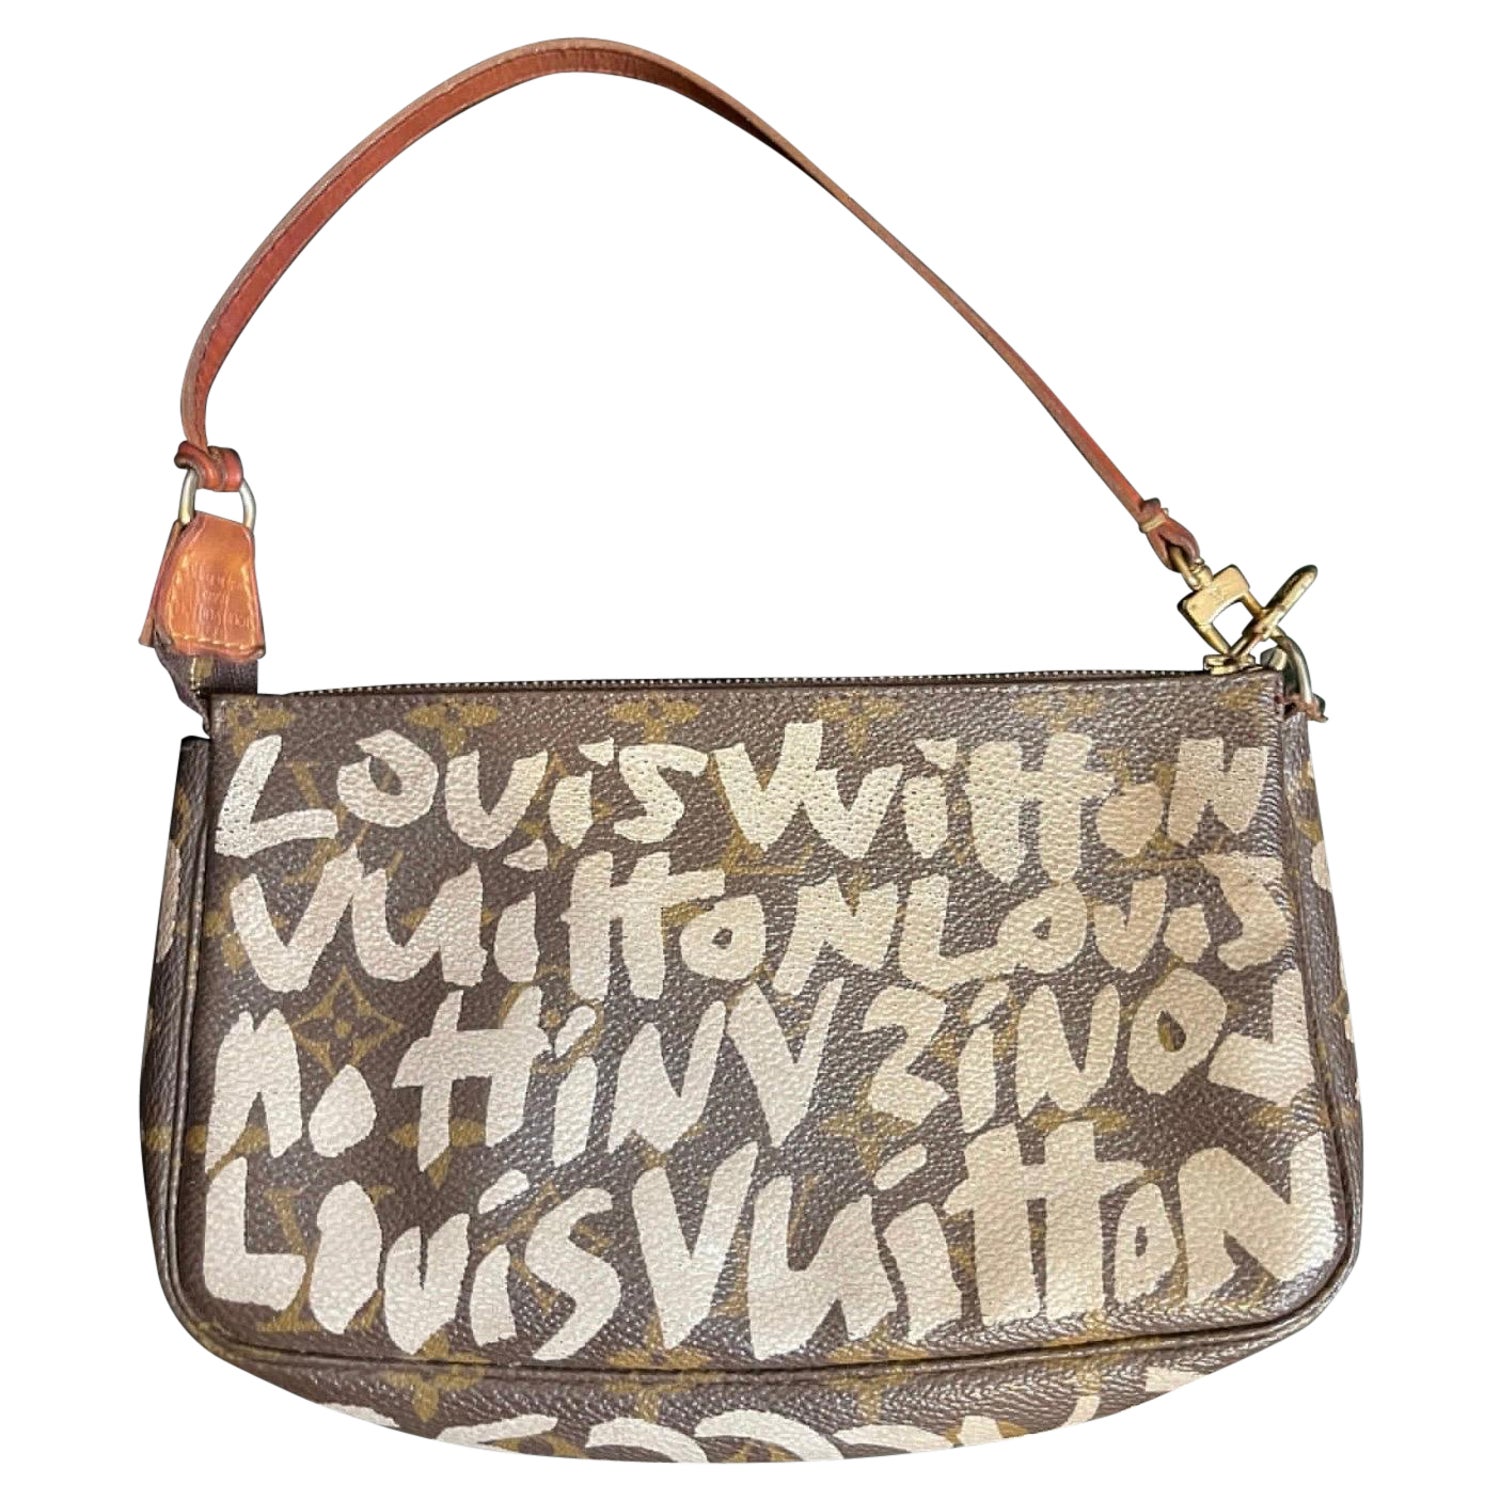 louis vuitton bag with writing on it